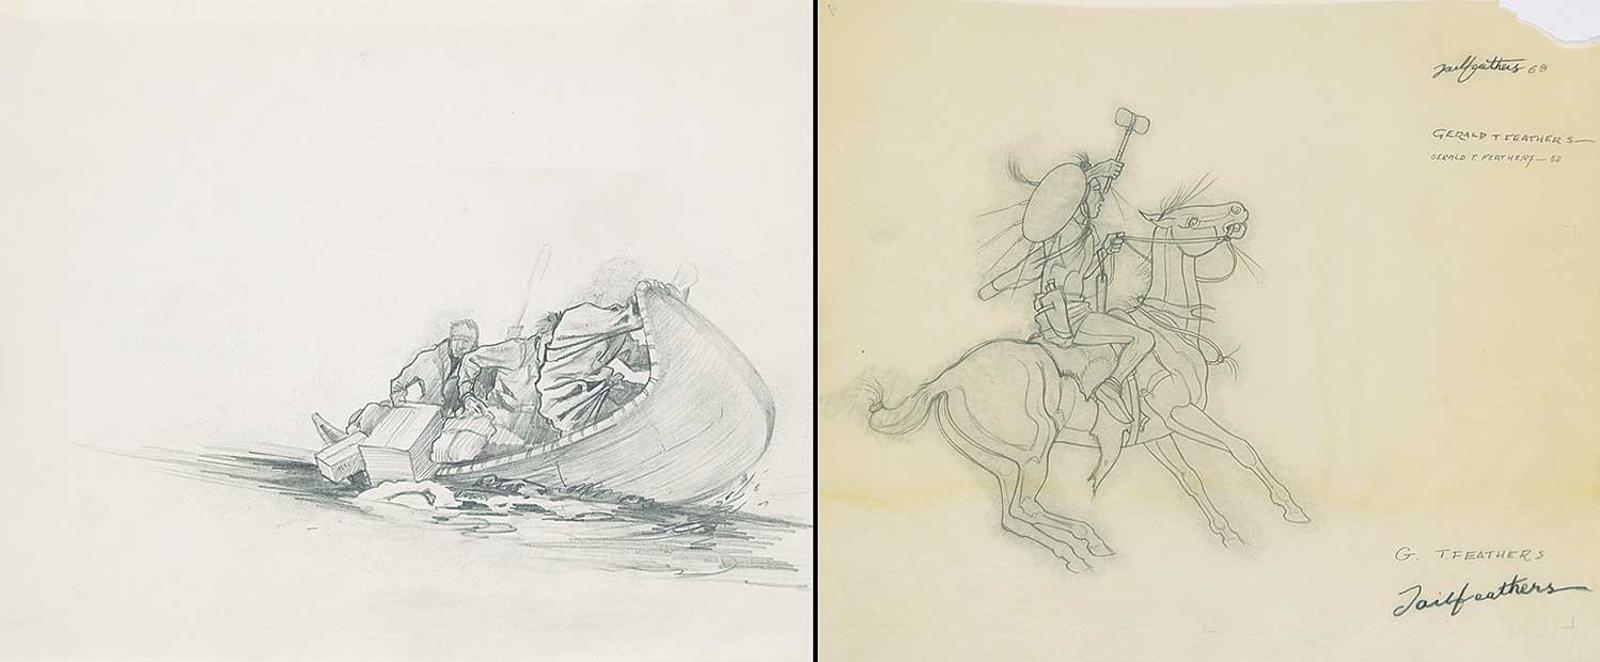 Gerald T. Tailfeathers (1925-1975) - Untitled - Two Sketches